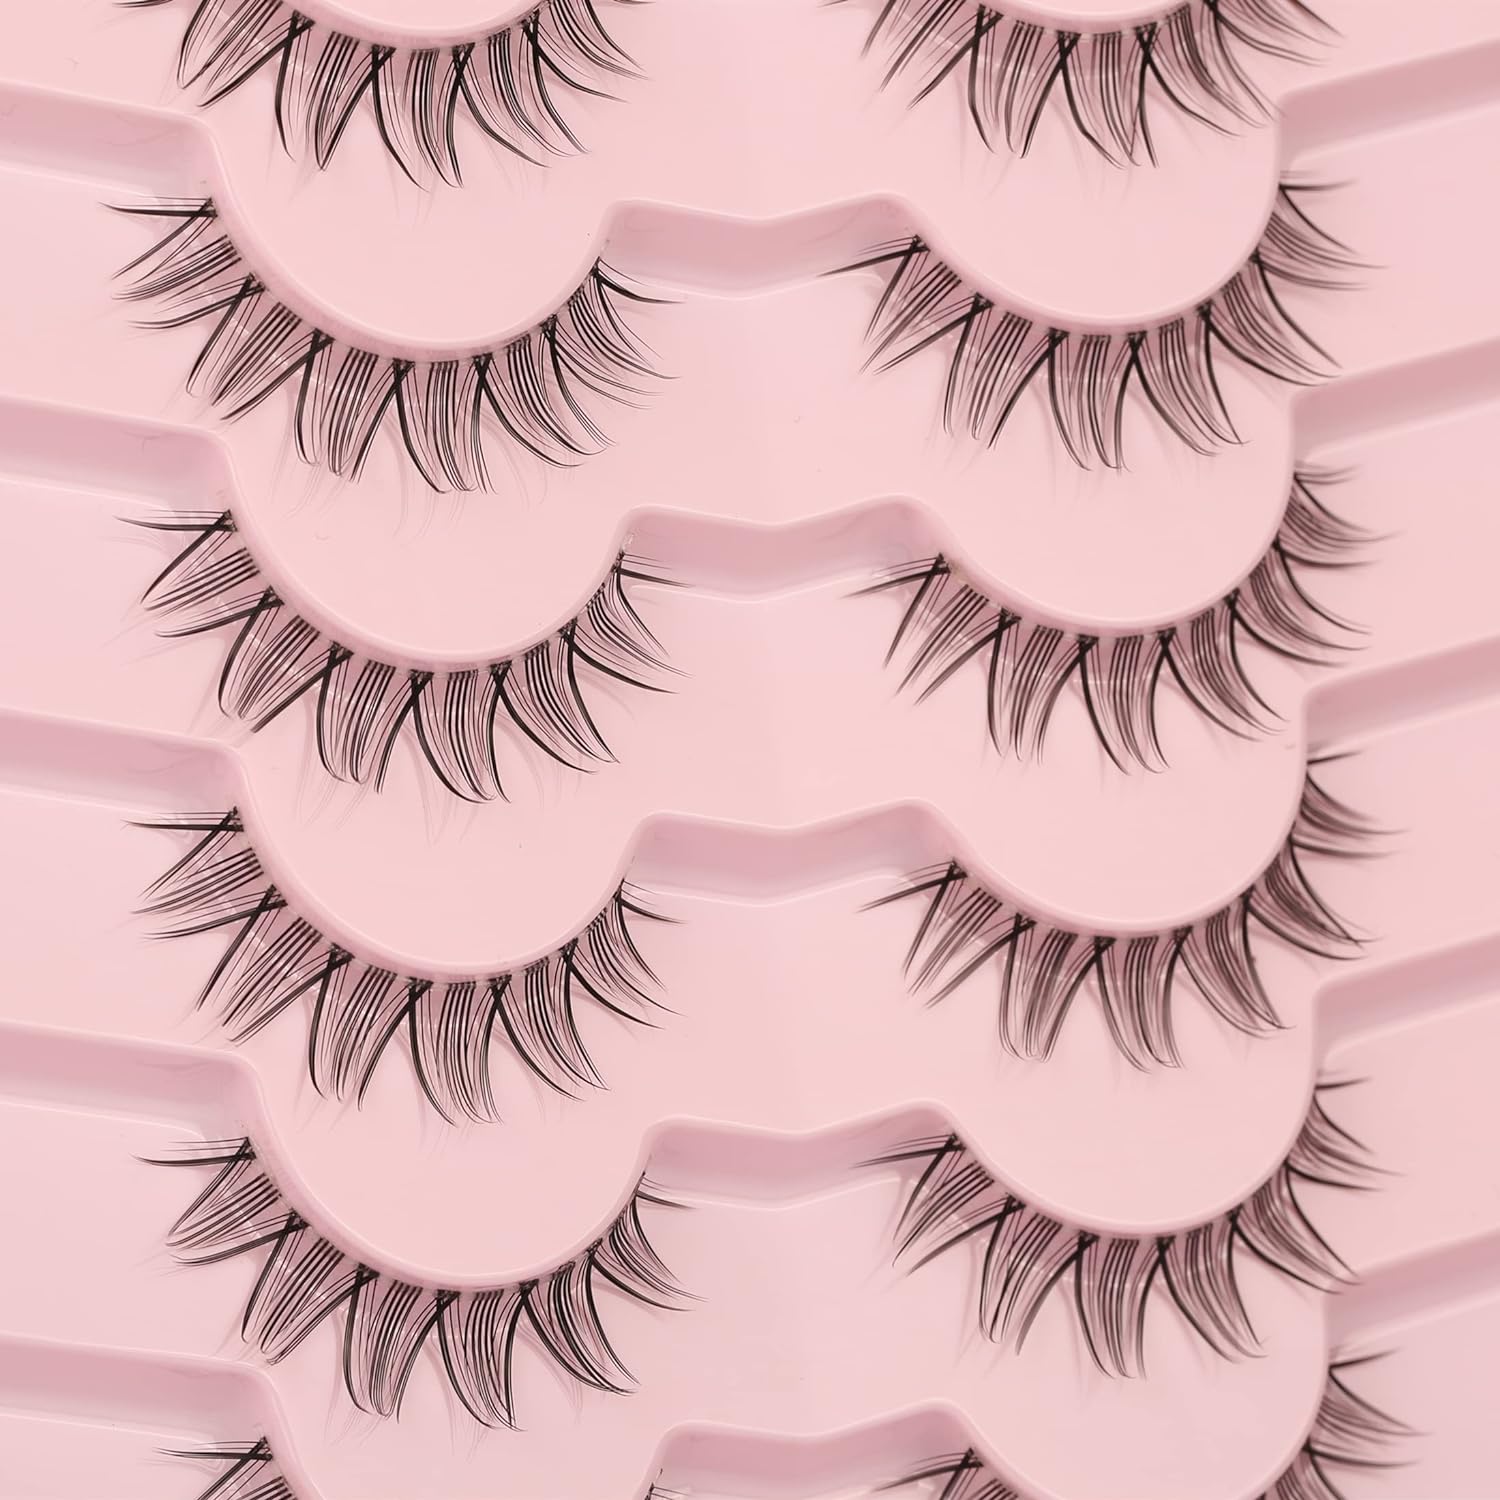 Pooplunch False Eyelashes Cat Eye Look Fluffy Wispy Faux Mink Lashes 7 Pairs 14MM Natural Extension Volume 8D Soft Curly Fake Eyelashes Strips Pack